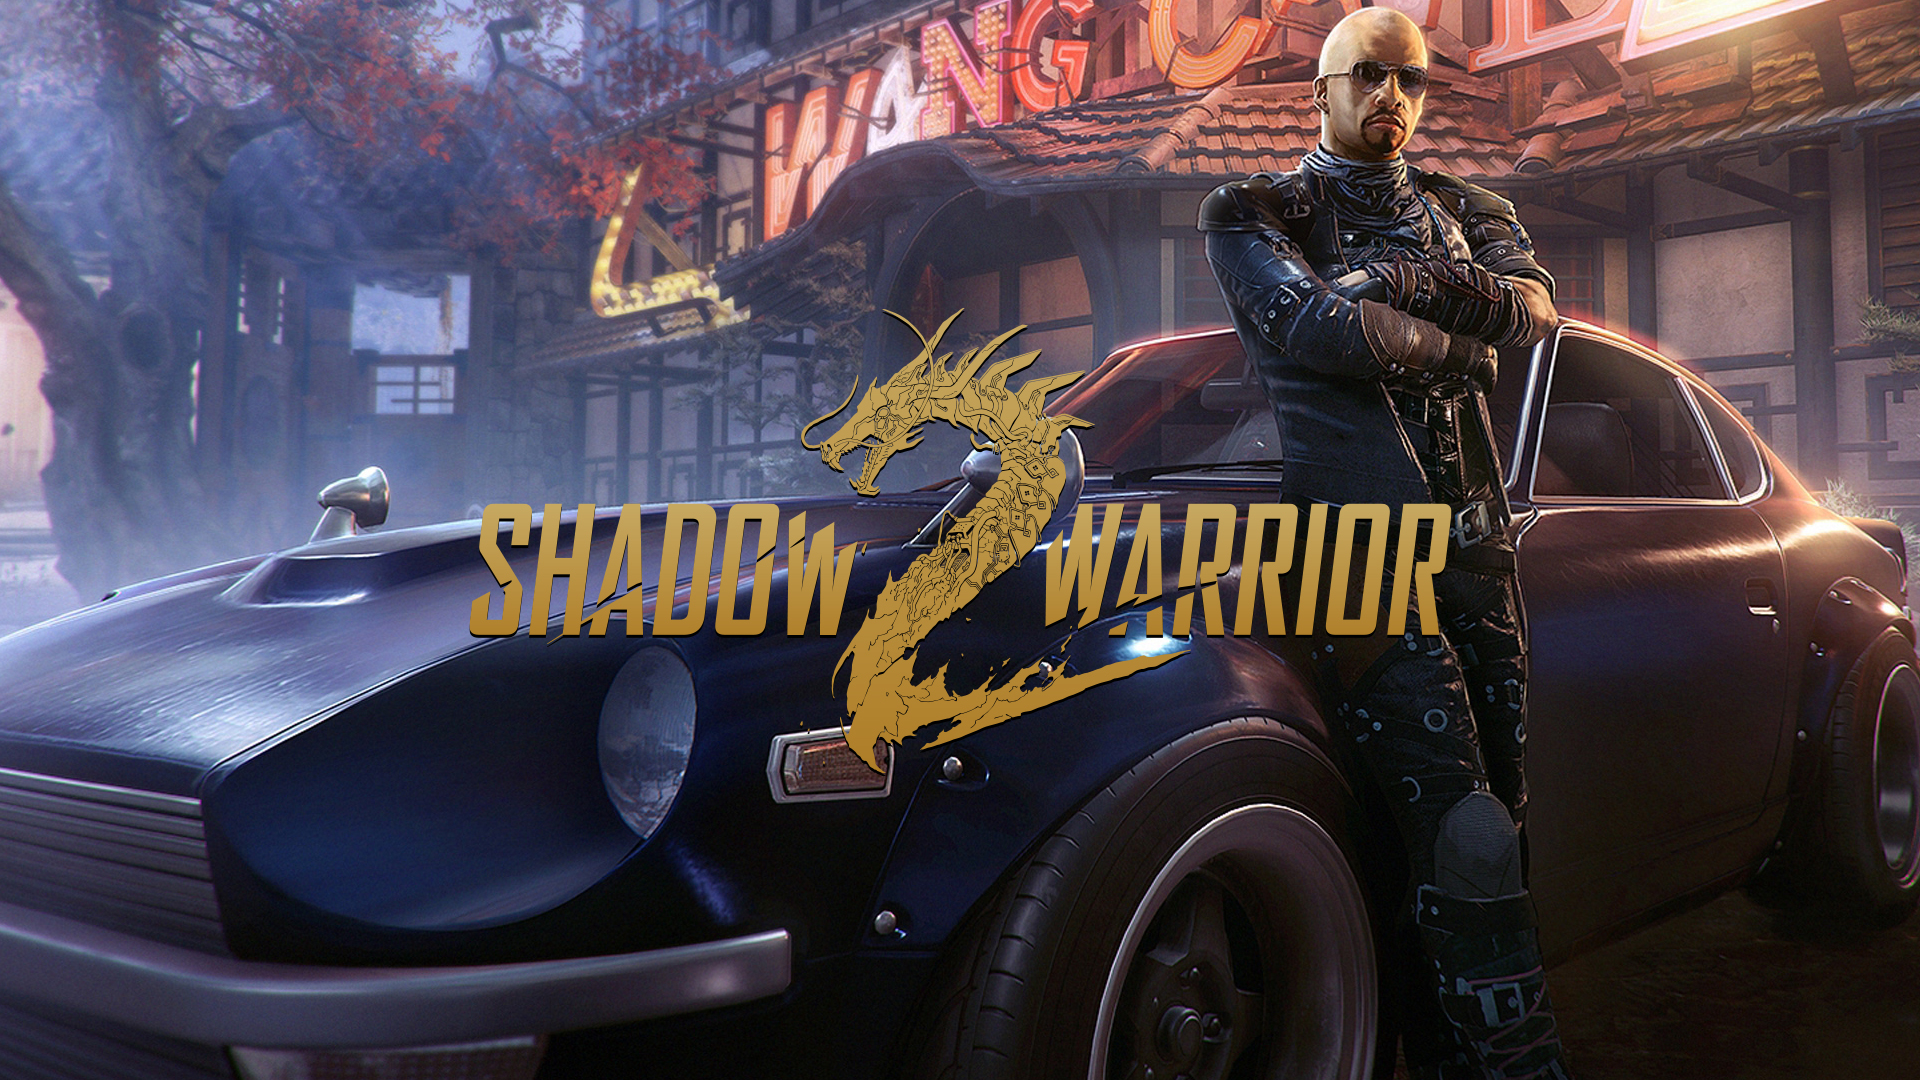 SHADOW WARRIOR 2 PC Review